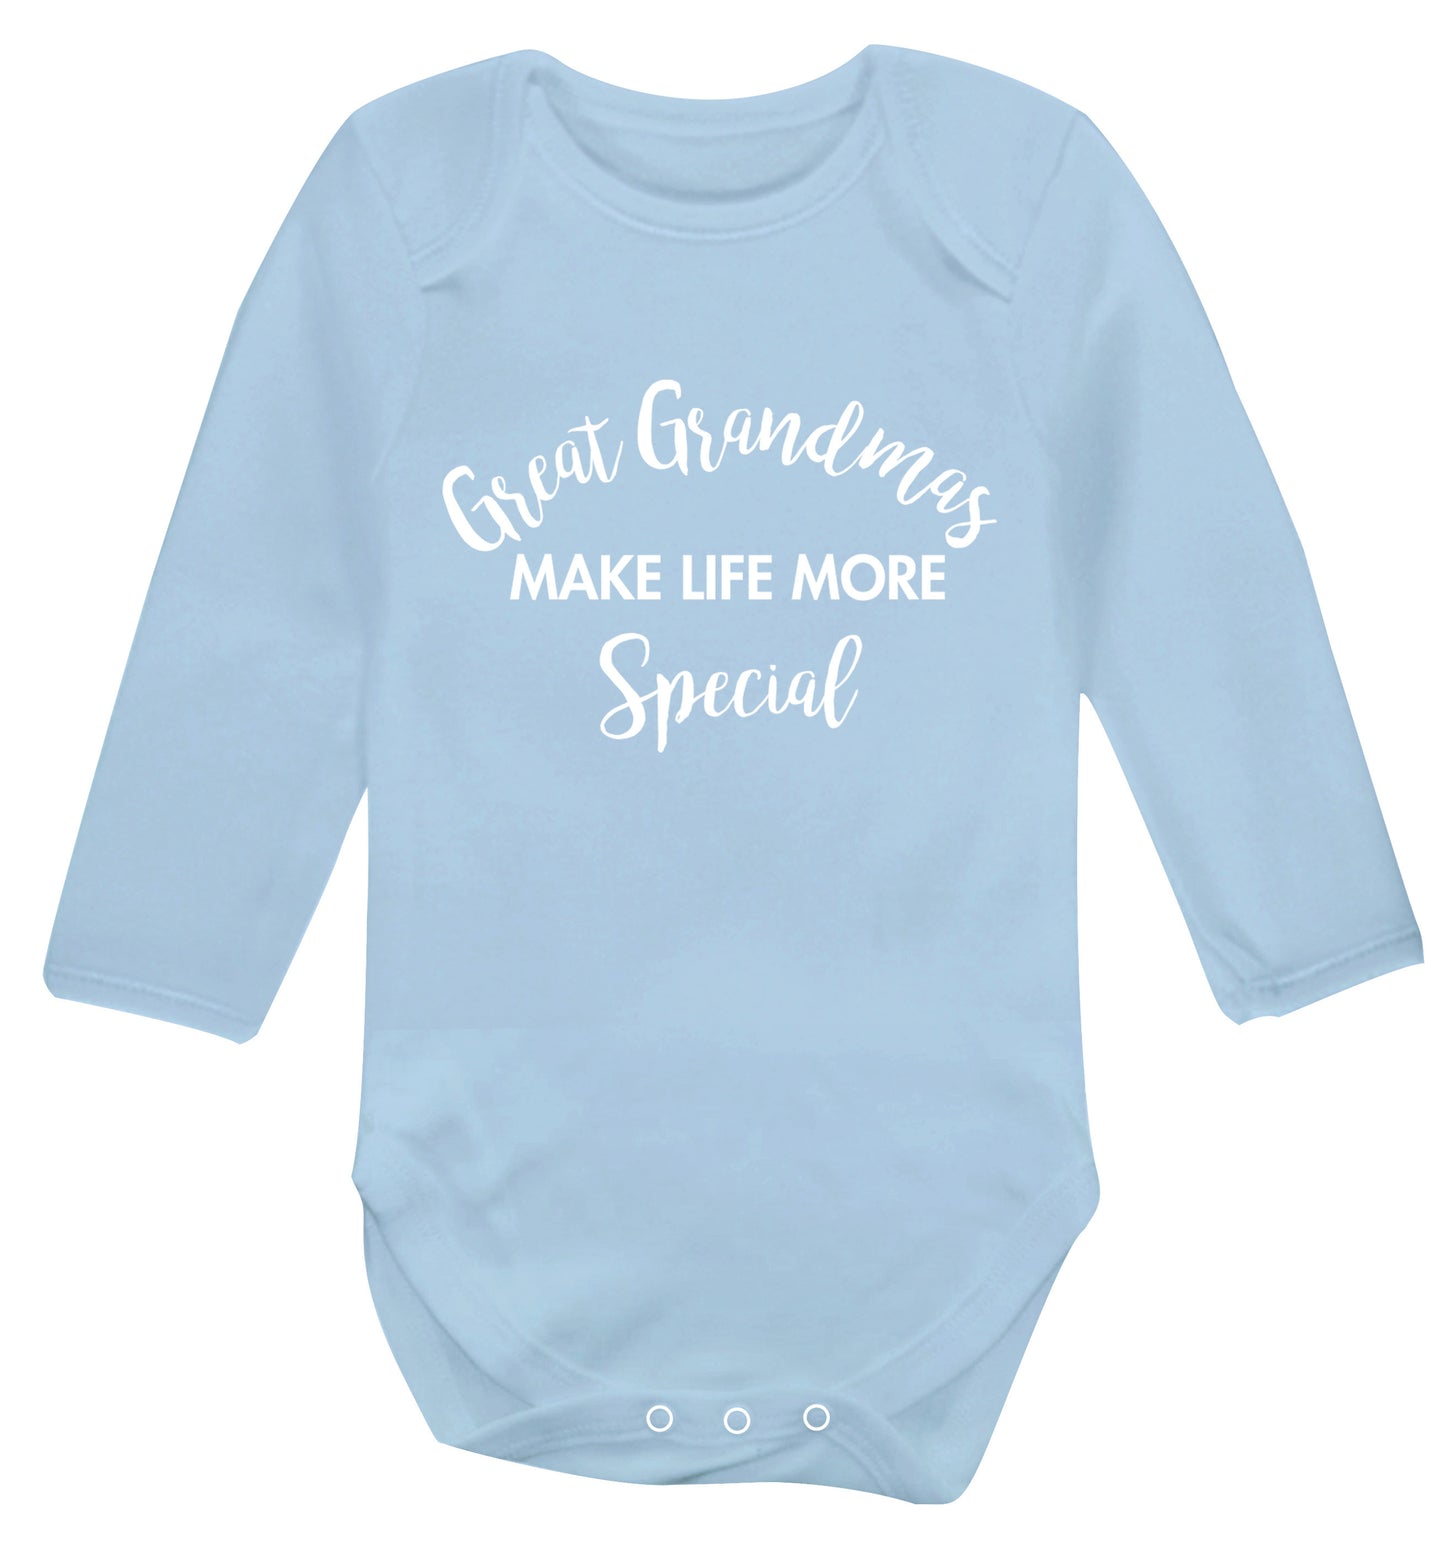 Great Grandmas make life more special Baby Vest long sleeved pale blue 6-12 months